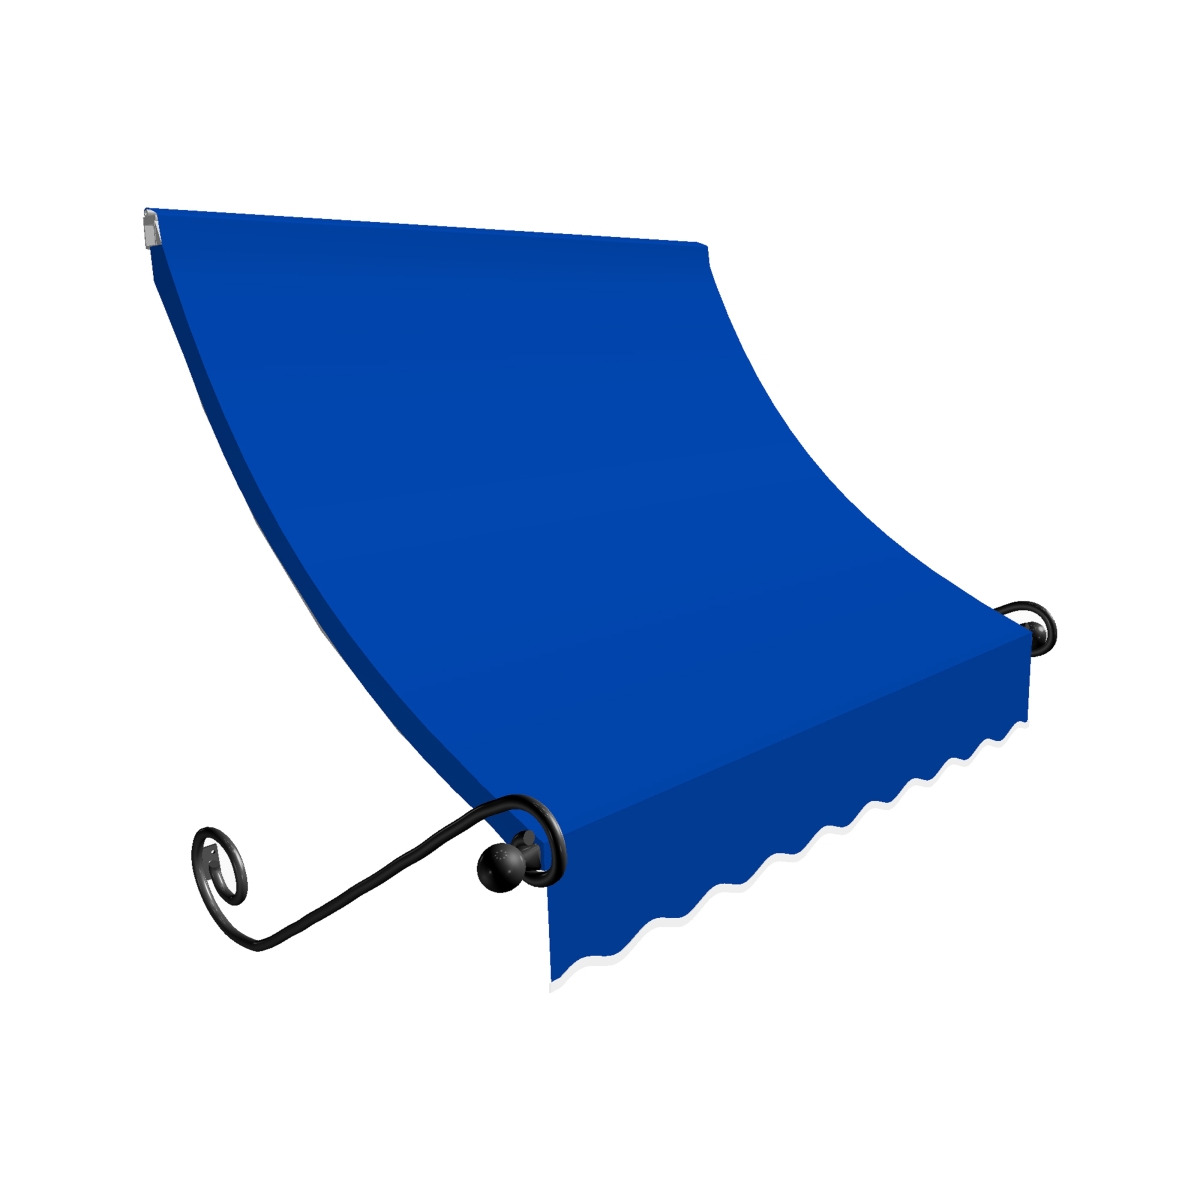 Ch22-us-7bb 7.38 Ft. Charleston Window & Entry Awning, Bright Blue - 31 X 24 In.